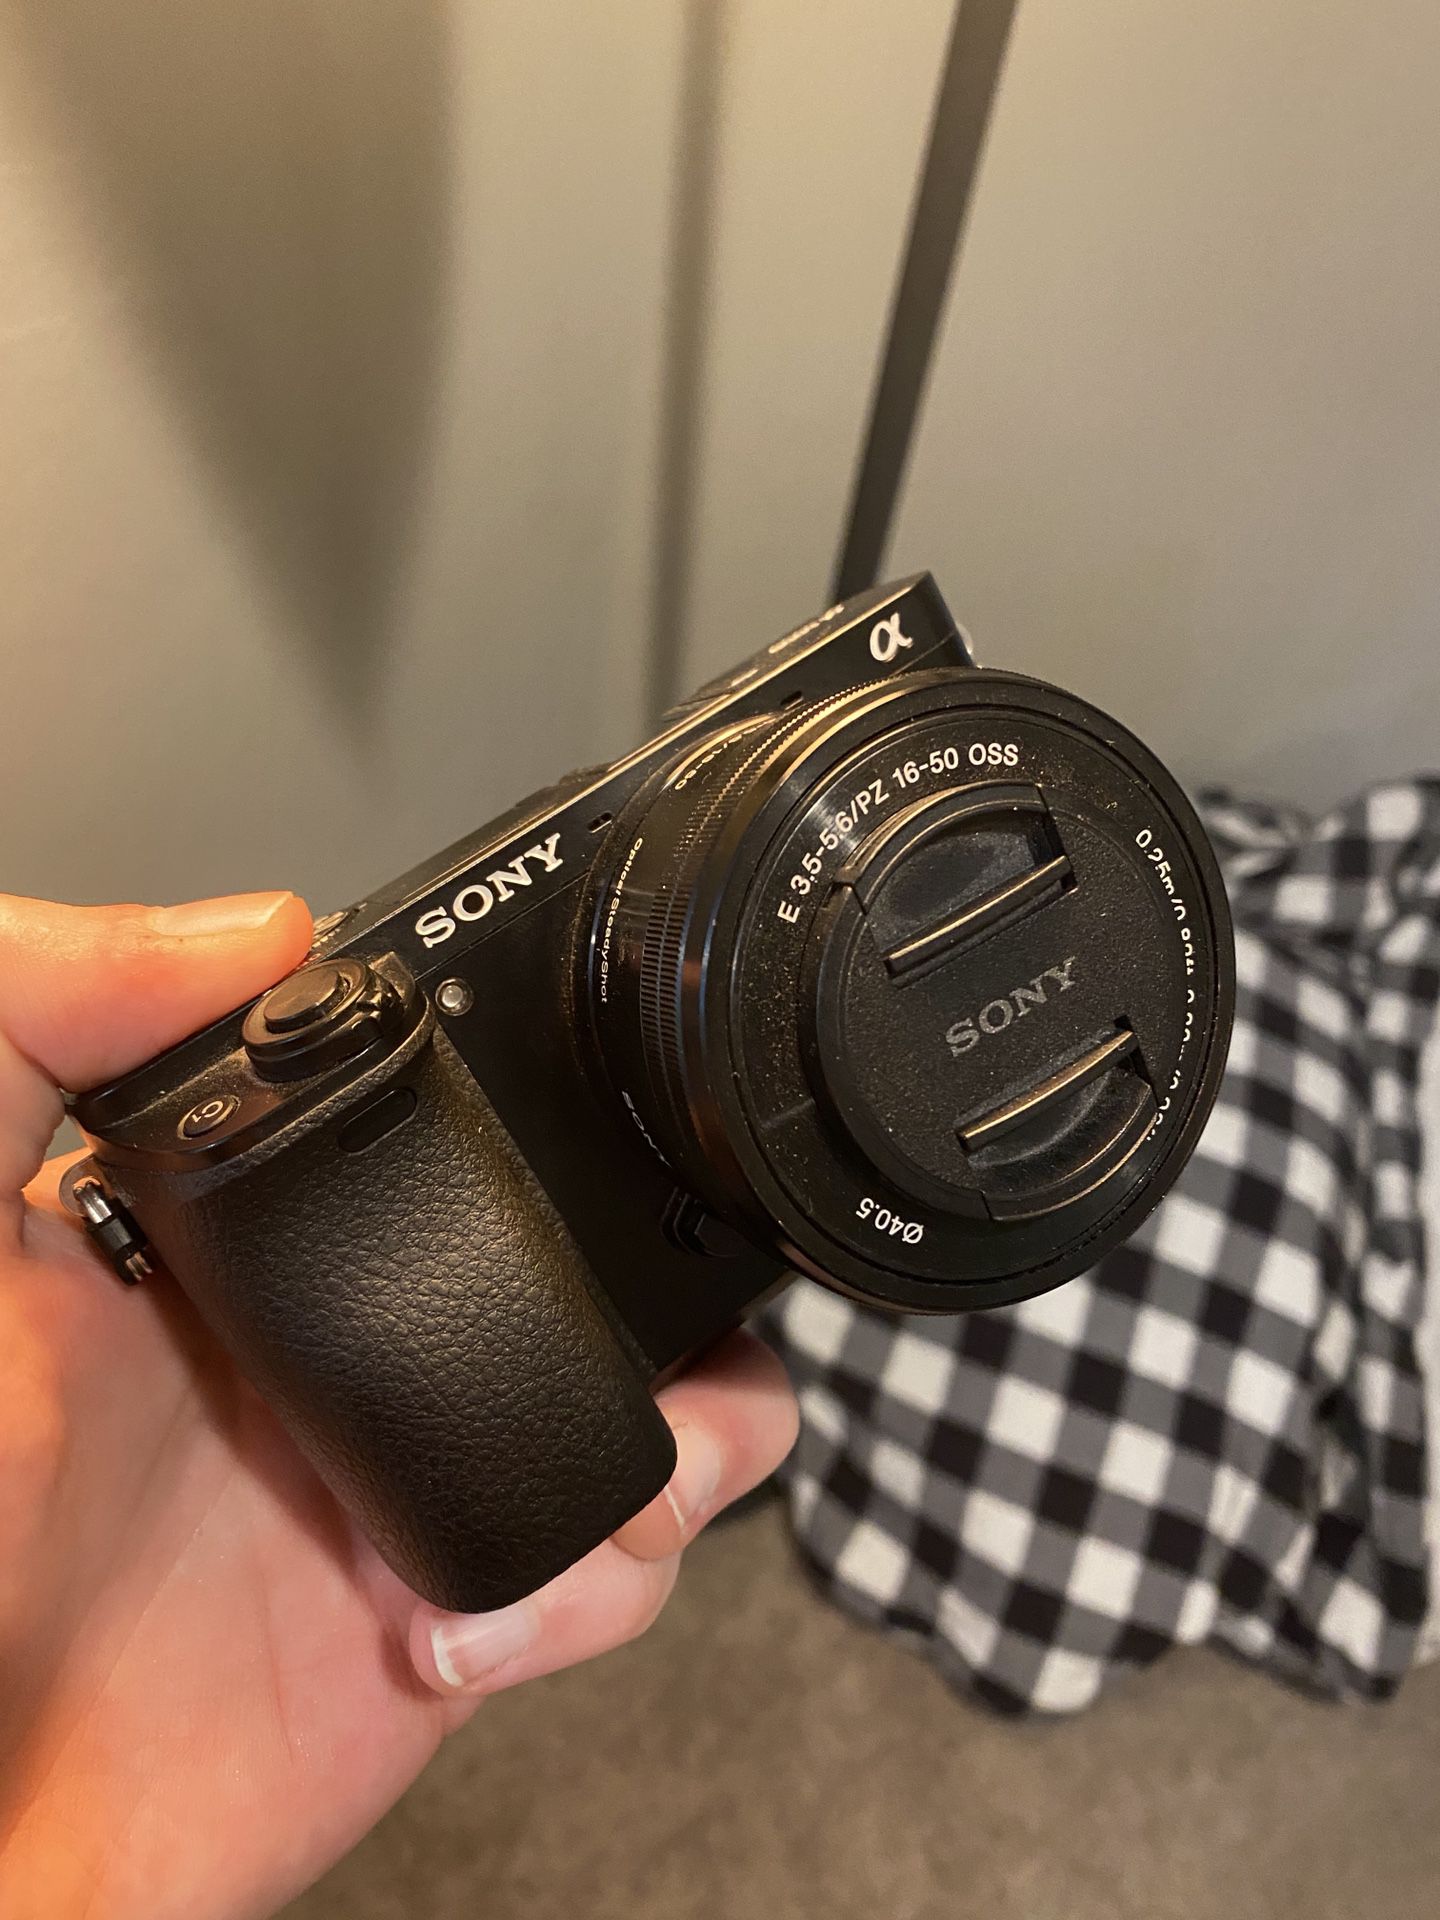 Used Sony a6000 w/ kit and 55-210 Lens